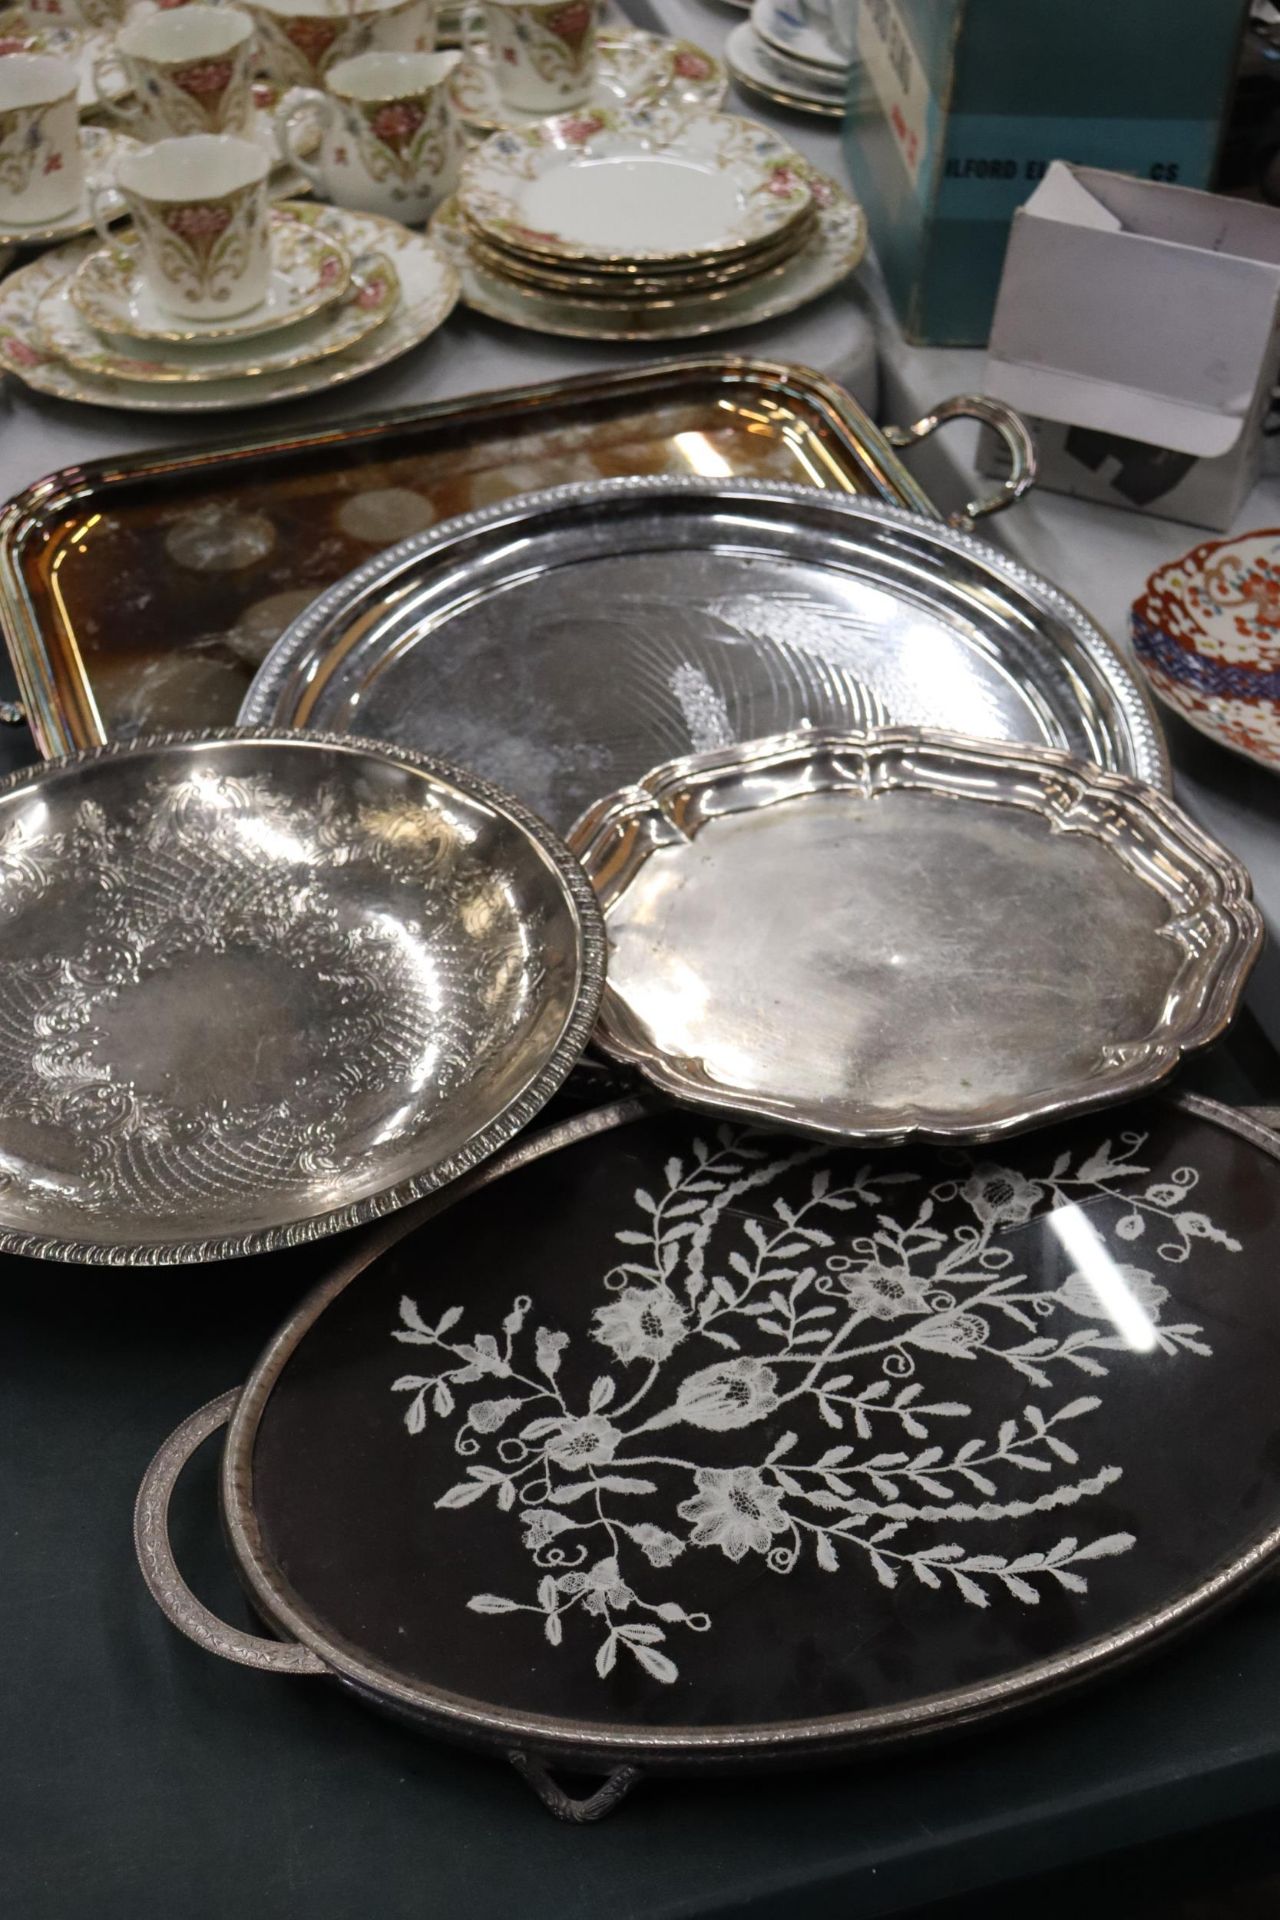 FIVE SILVER PLATE TRAYS ONE WITH AN EMBROIDERED INLAY